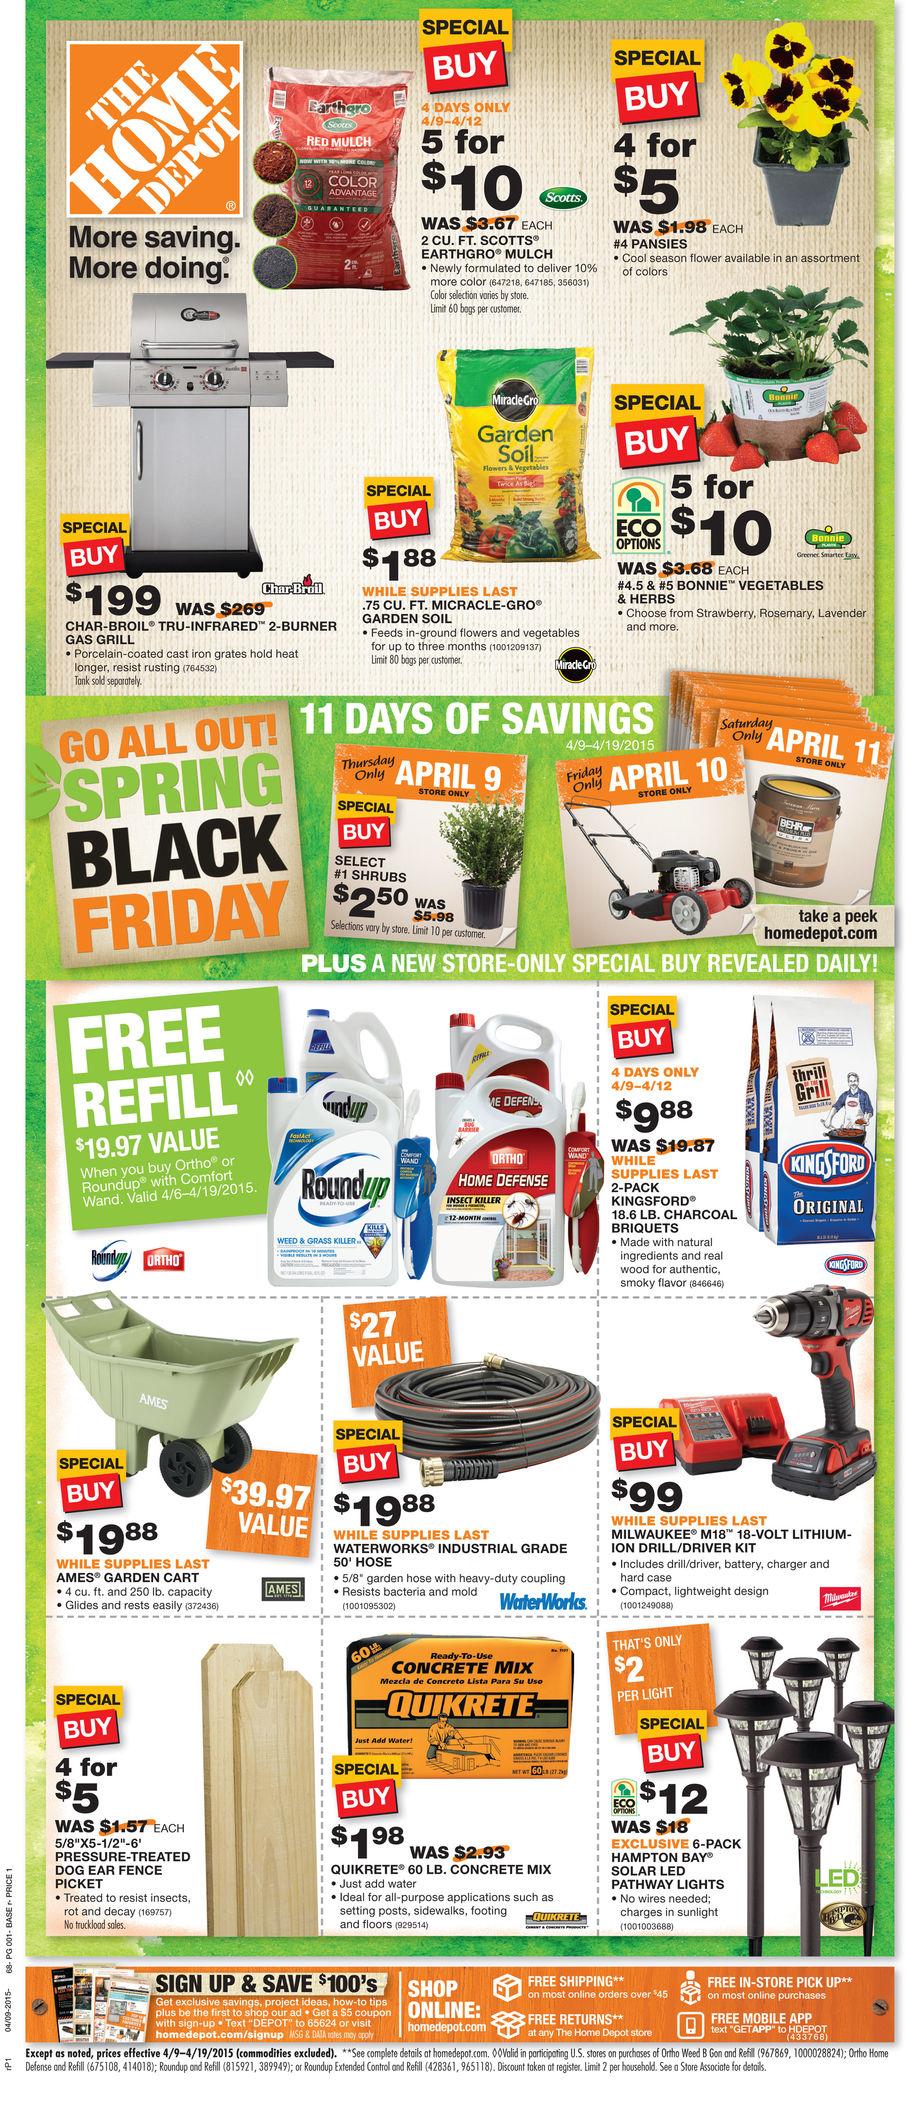 Home Depot Spring Black Friday Sale Great Deals On Plants Soil Mulch And More Ship Saves